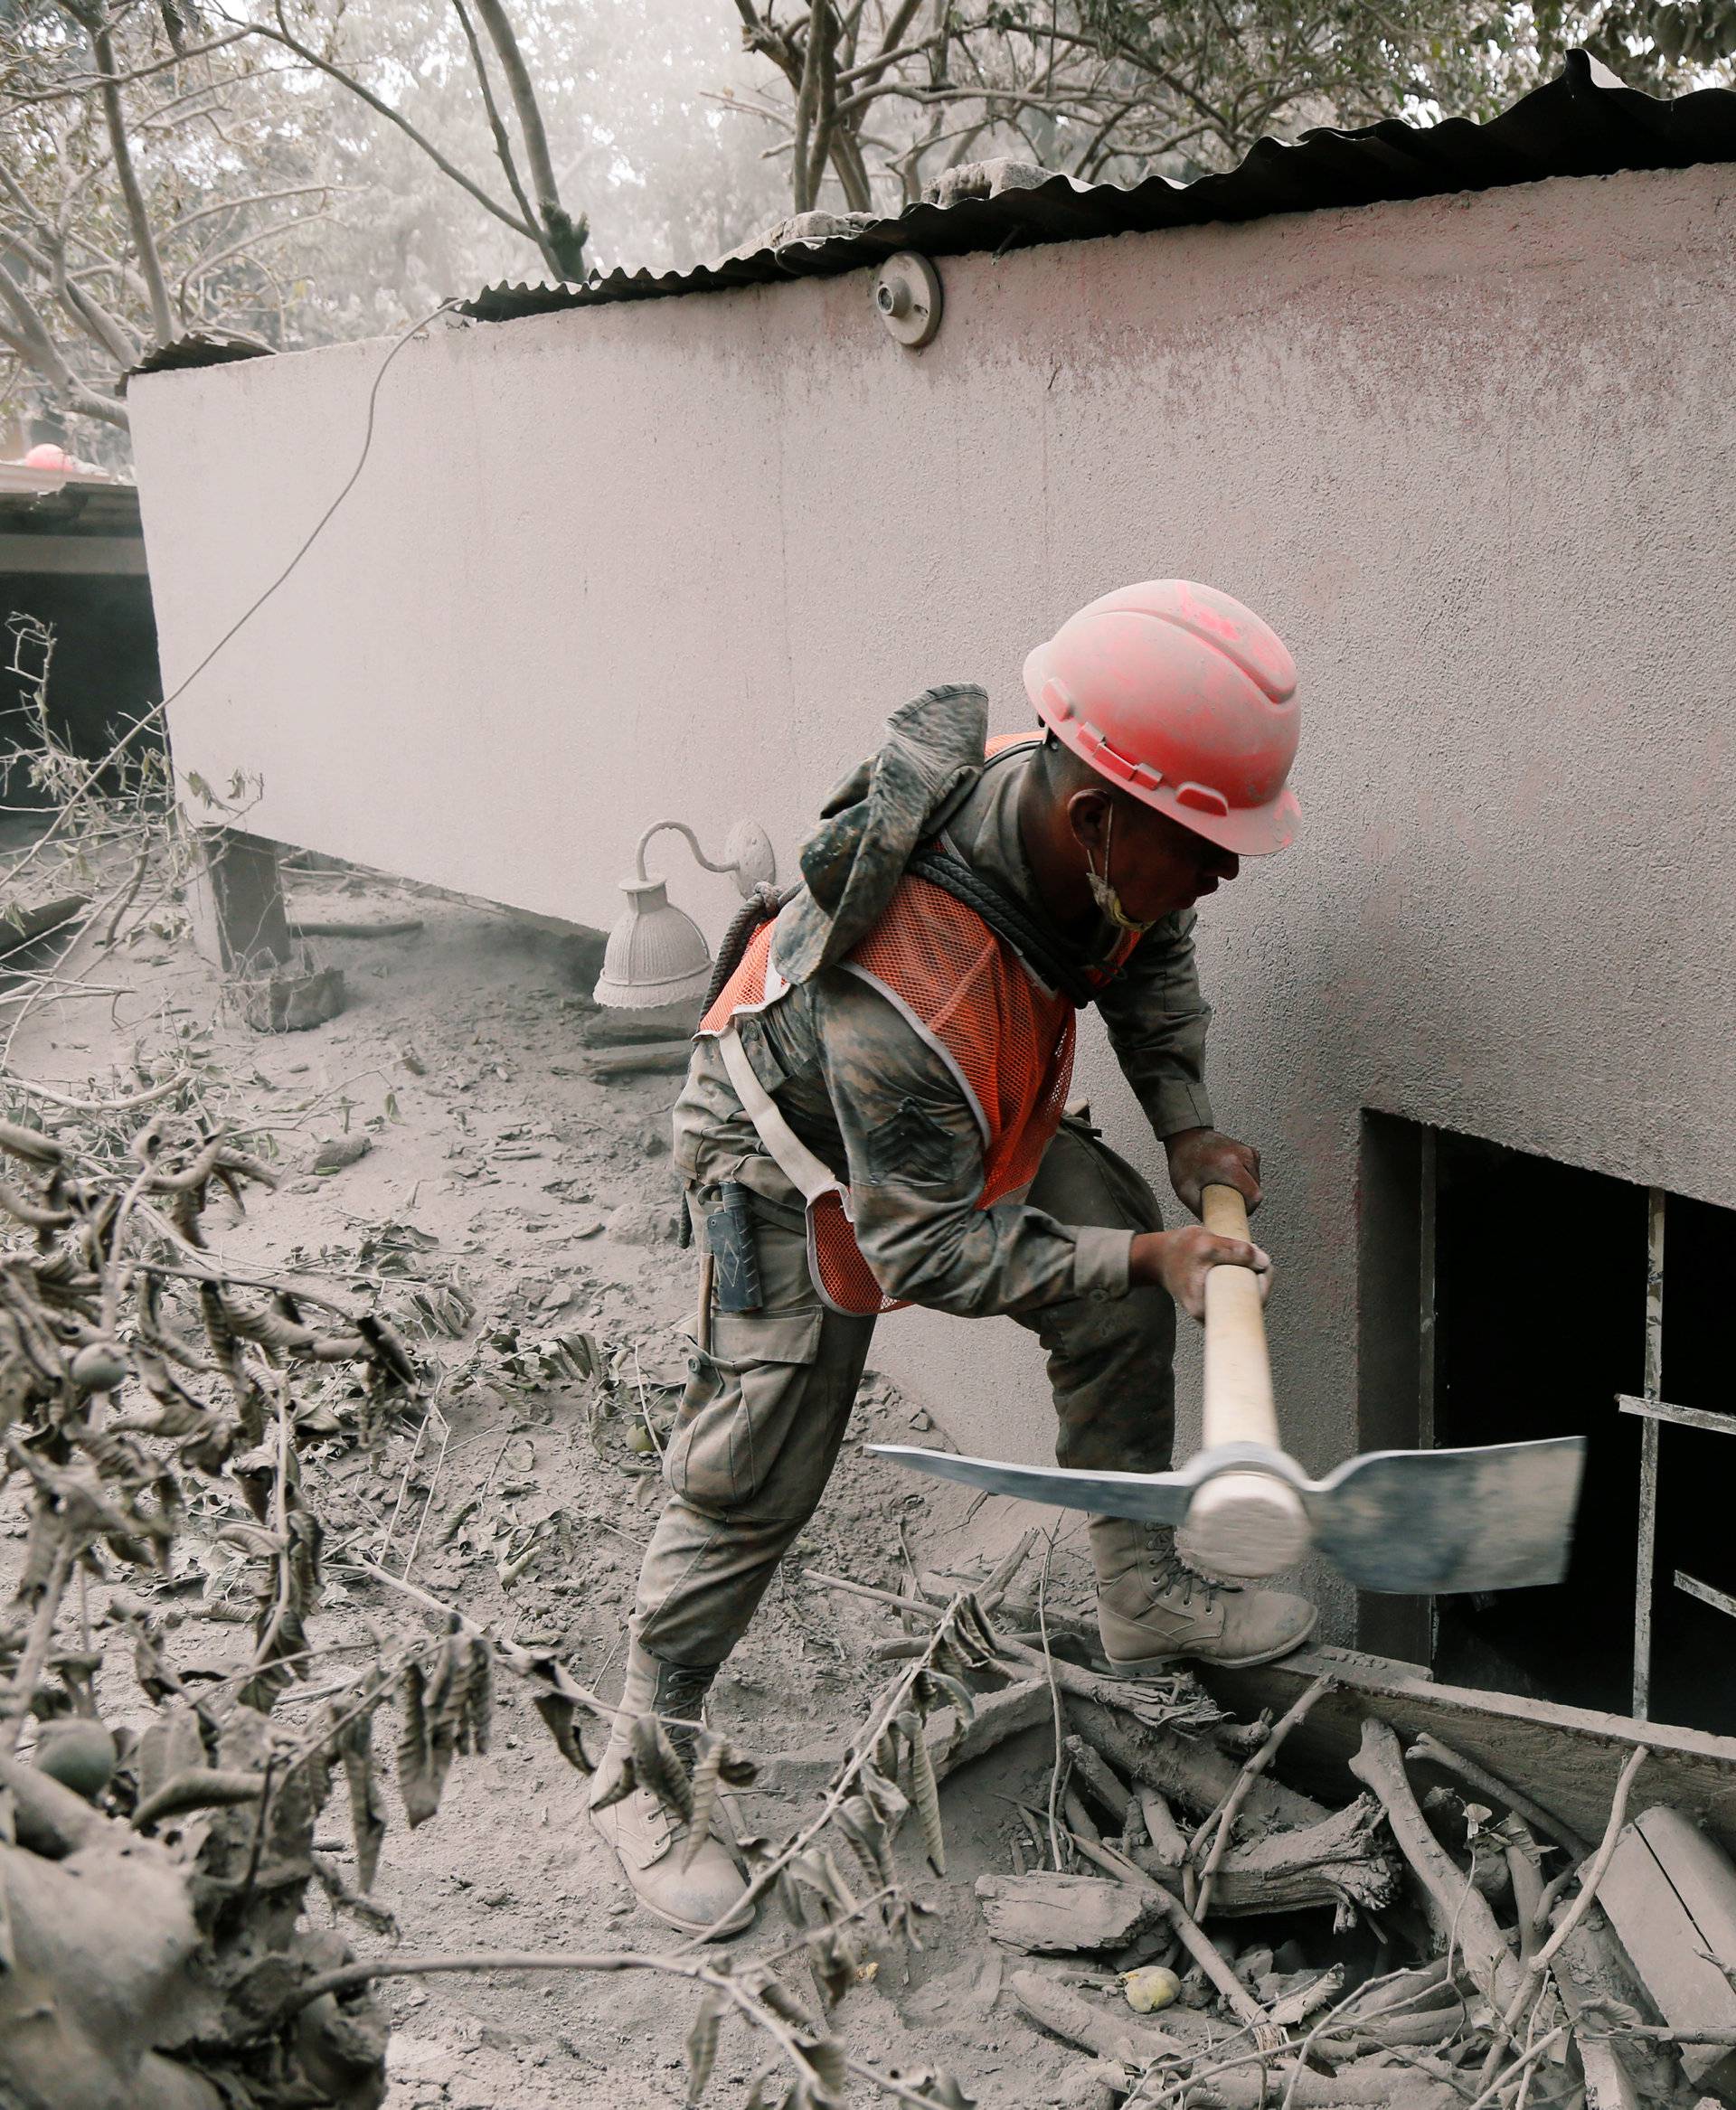 A soldier uses a pick at an area affected by the eruption of the Fuego volcano in the community of San Miguel Los Lotes in Escuintla